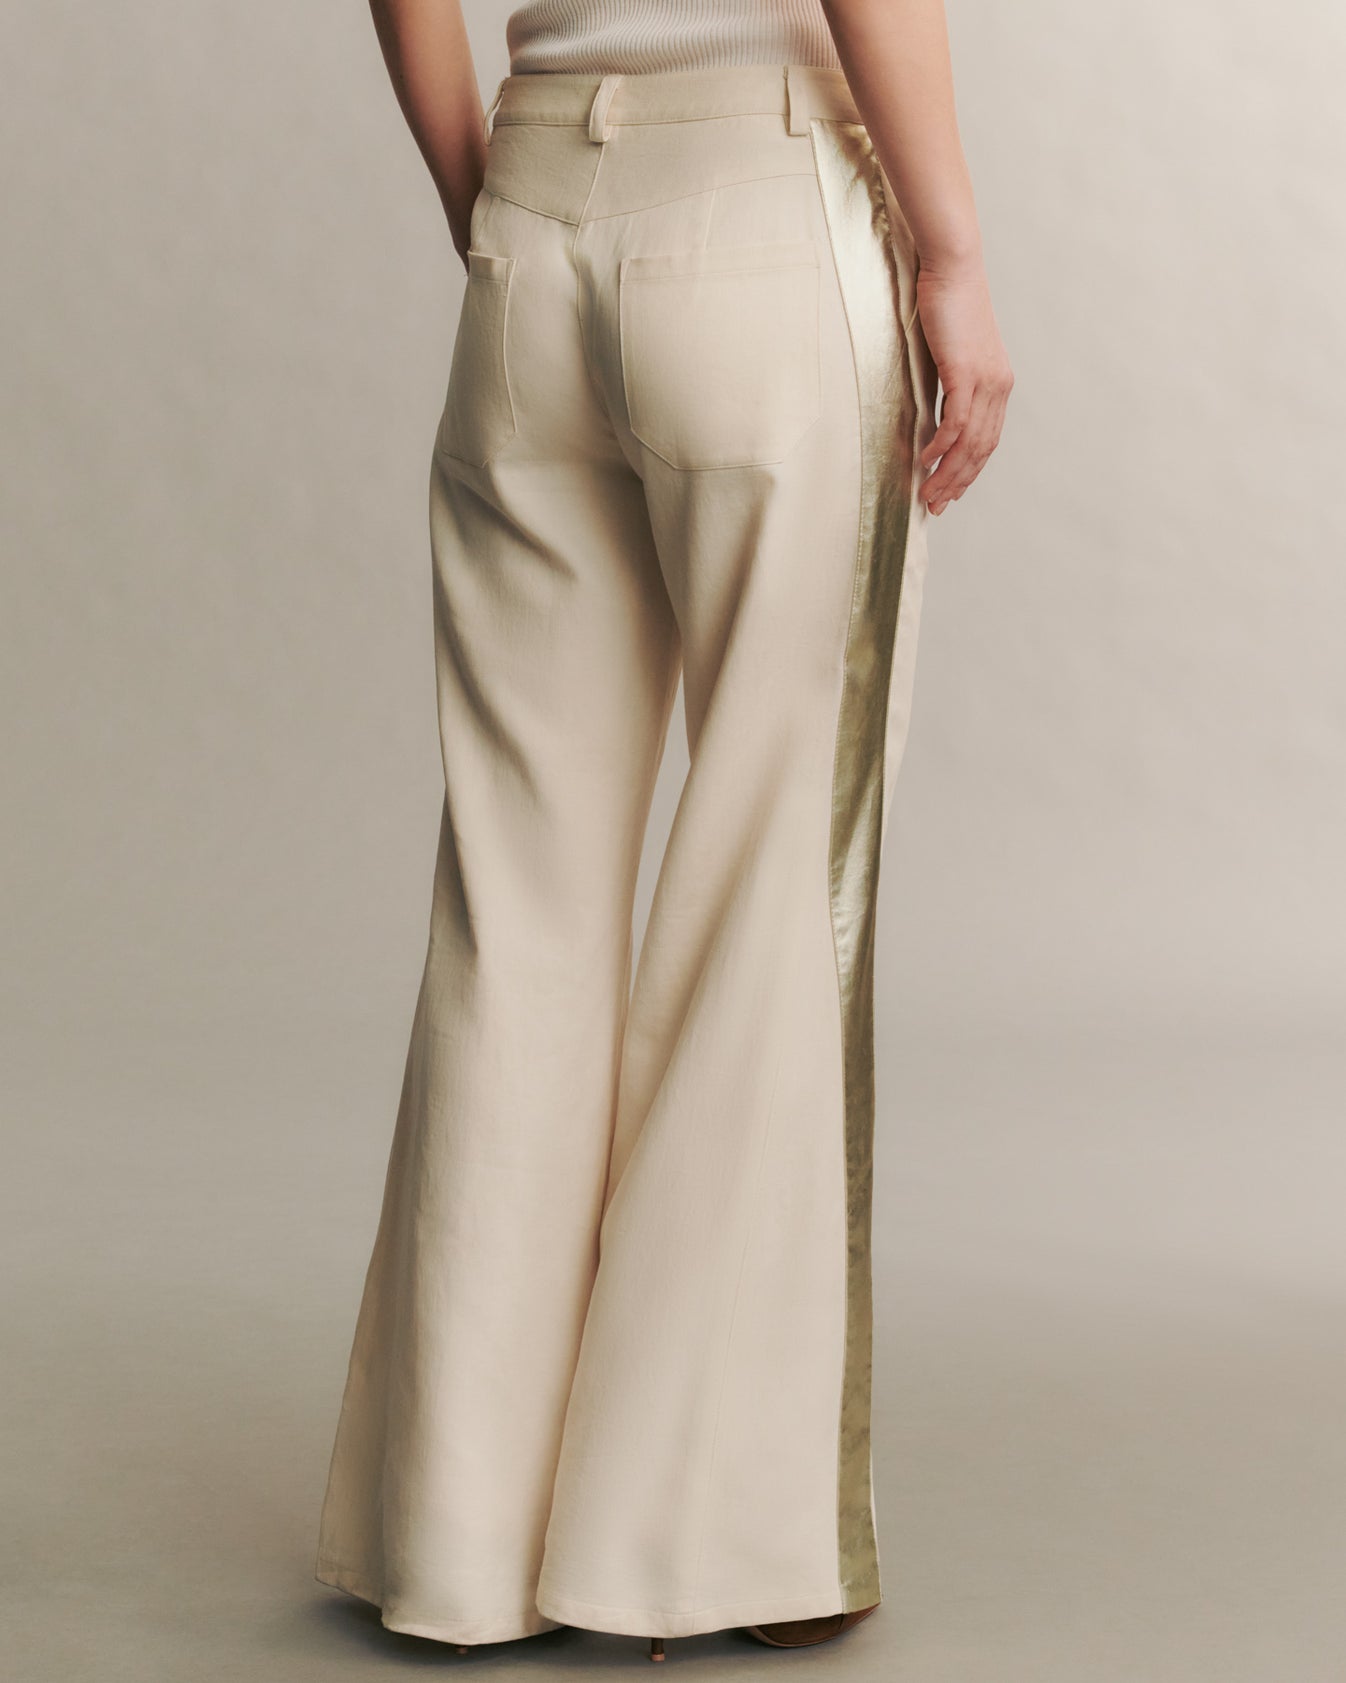 TWP Bone/light gold Stay Golden Pant in Cotton Linen view 5